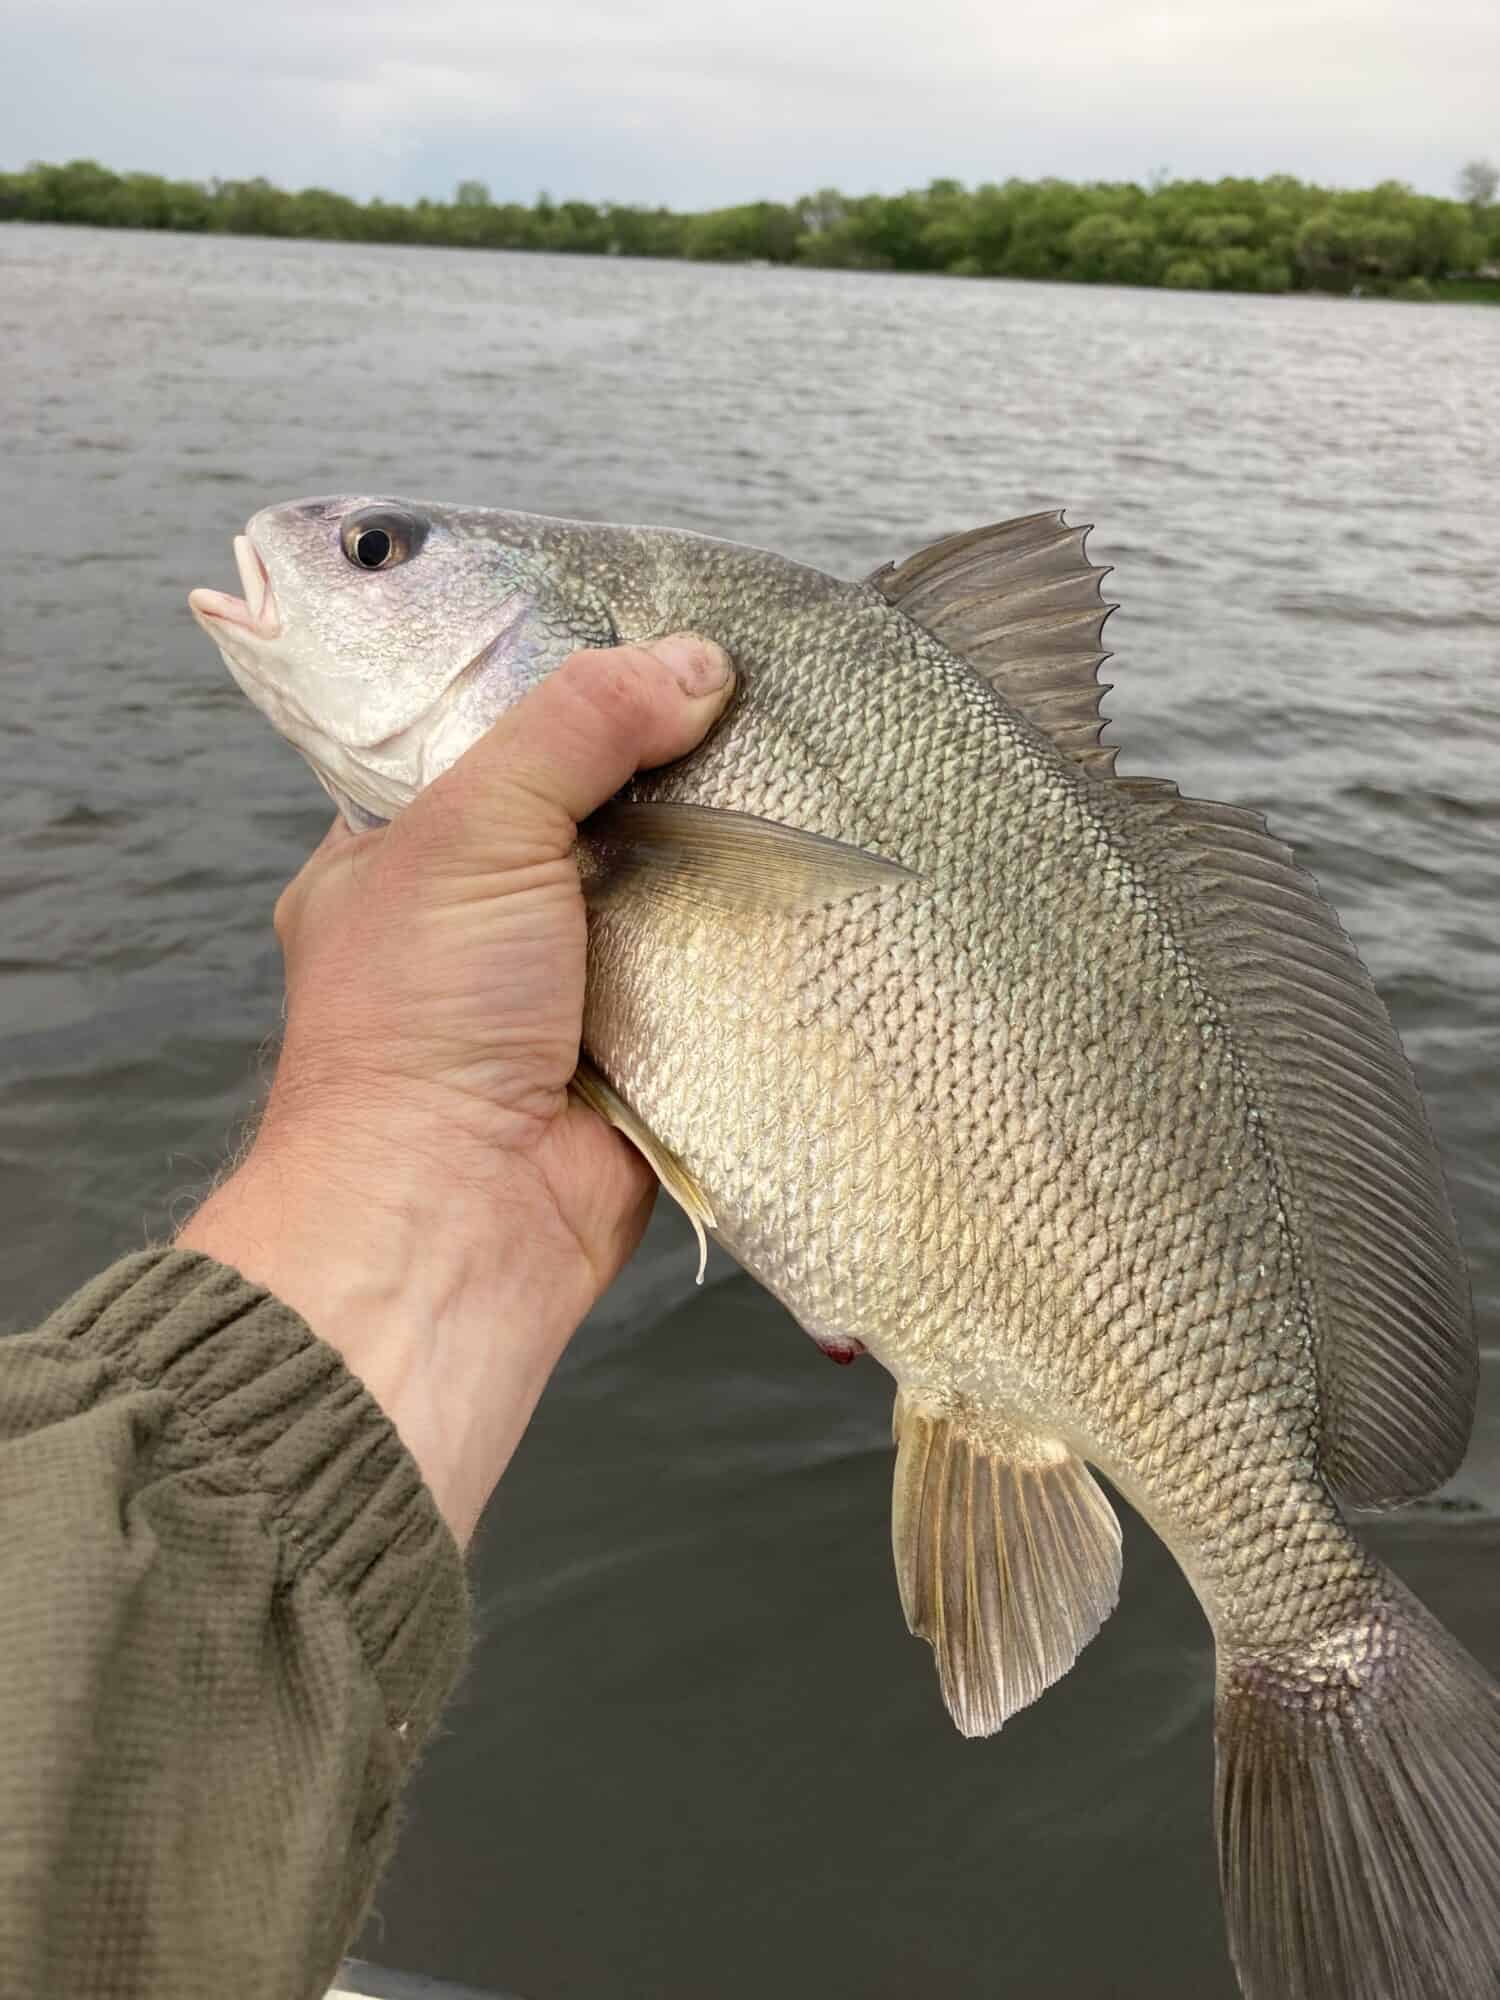 Freshwater Drum also known as a Sheepshead